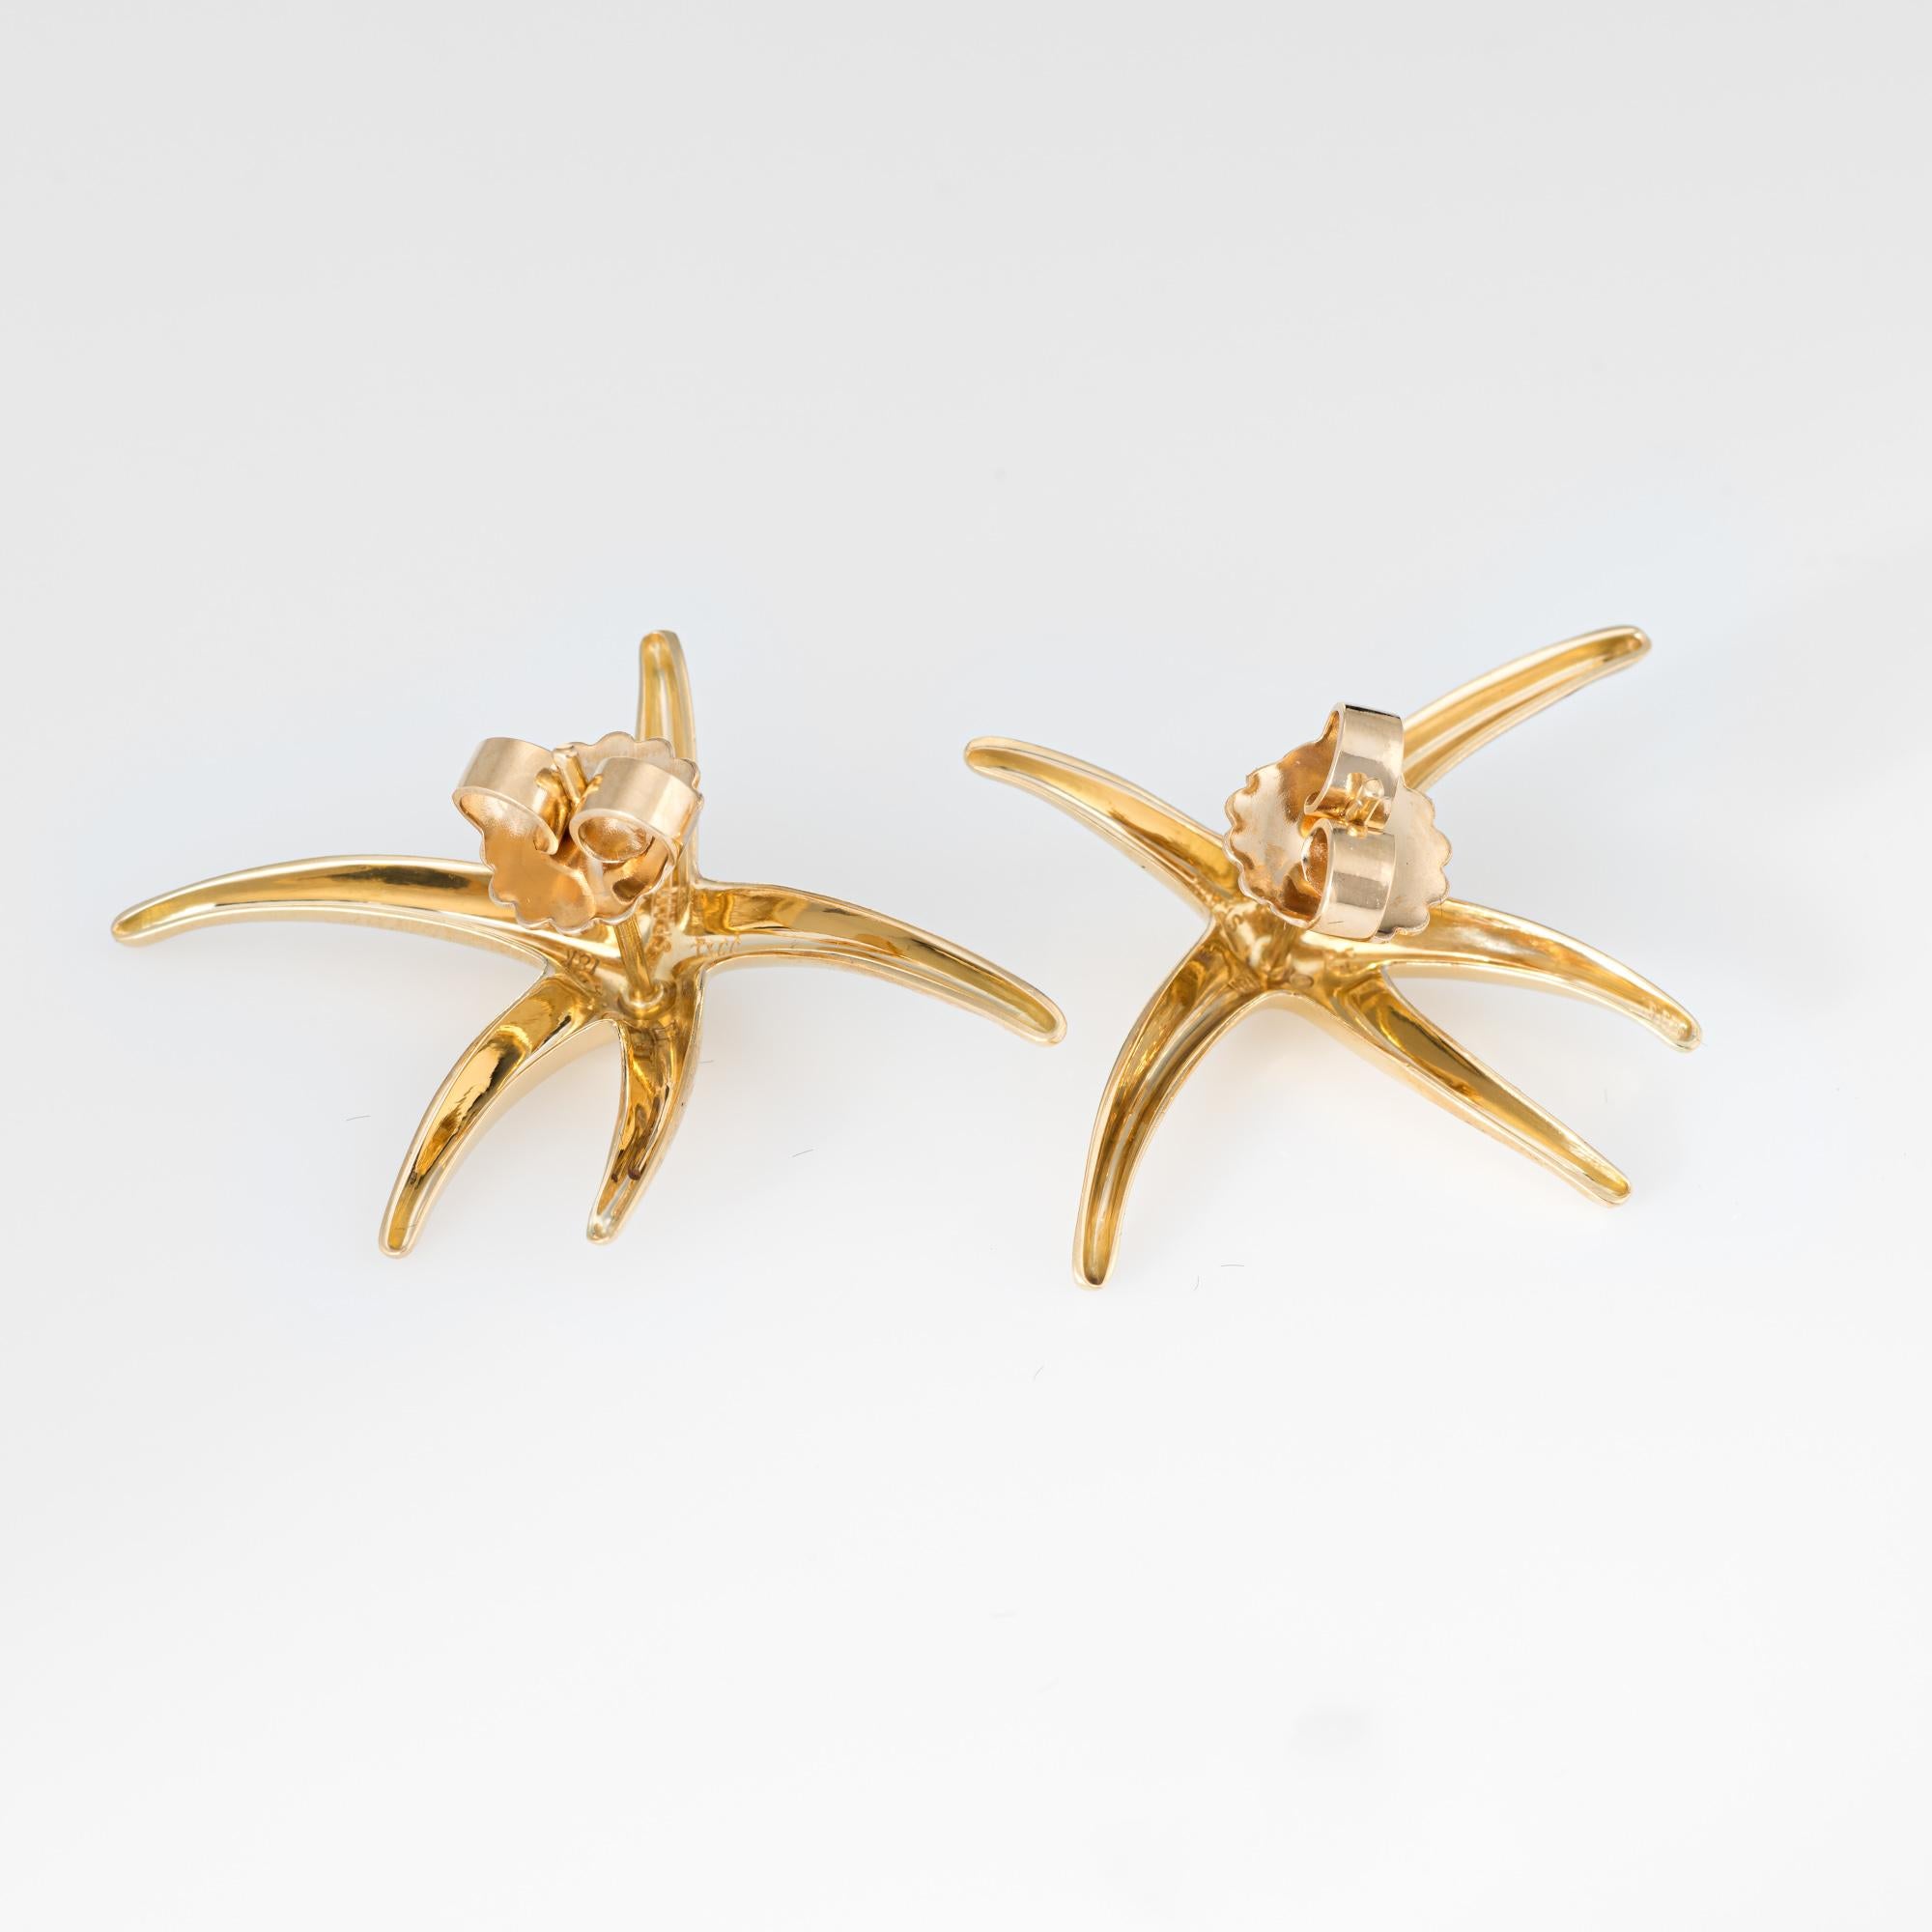 Elegant pair of vintage Tiffany & Co starfish earrings (circa 1980s) crafted in 18k yellow gold. 

The large starfish Tiffany & Co earrings are designed by Elsa Peretti. The earrings are fitted with post and butterfly backings for pierced ears.